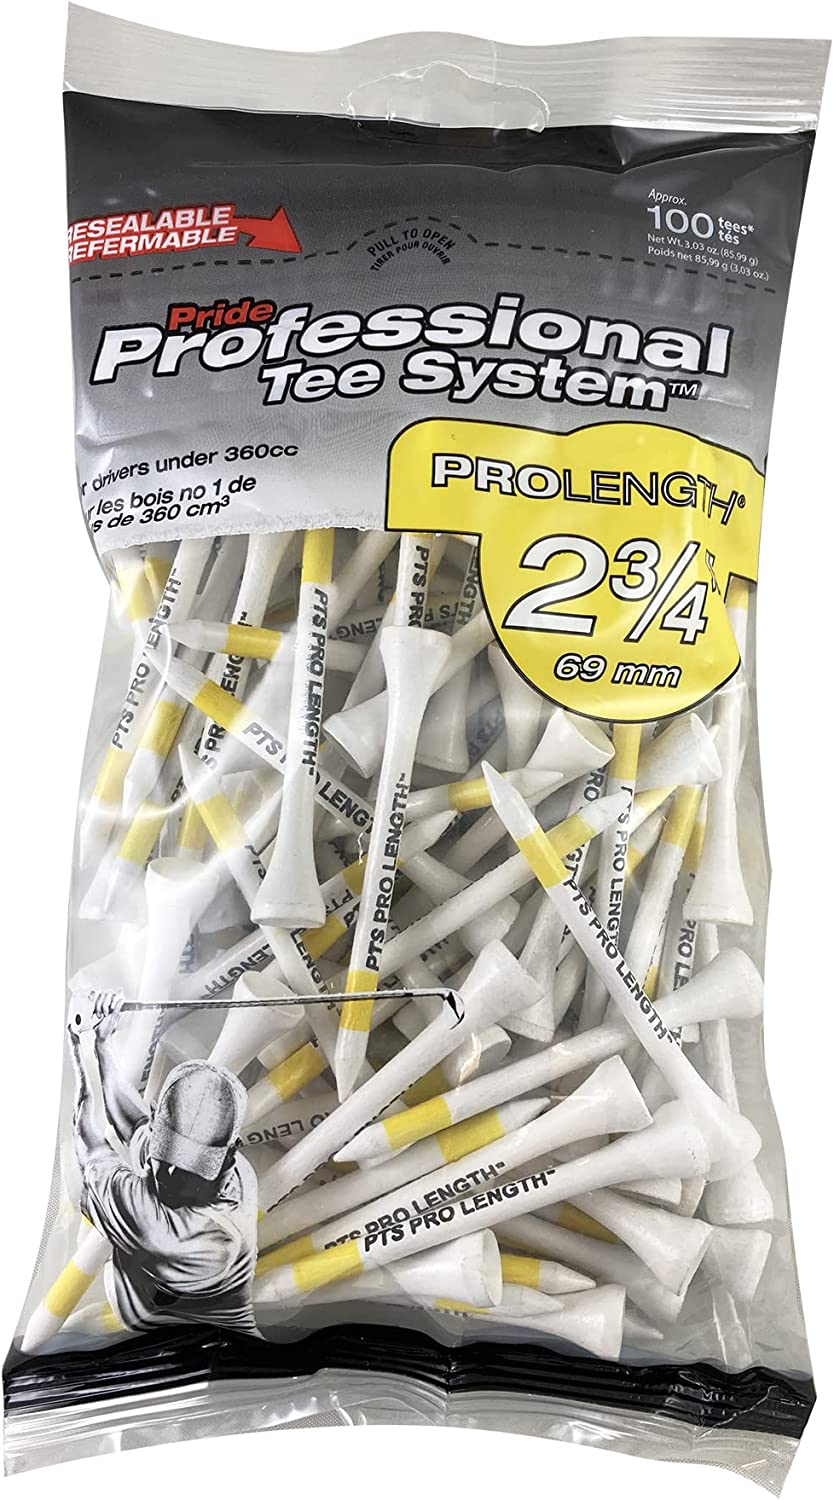 PRIDE PROFESSIONAL TEE SYSTEM 2 3/4" 100 WHITE